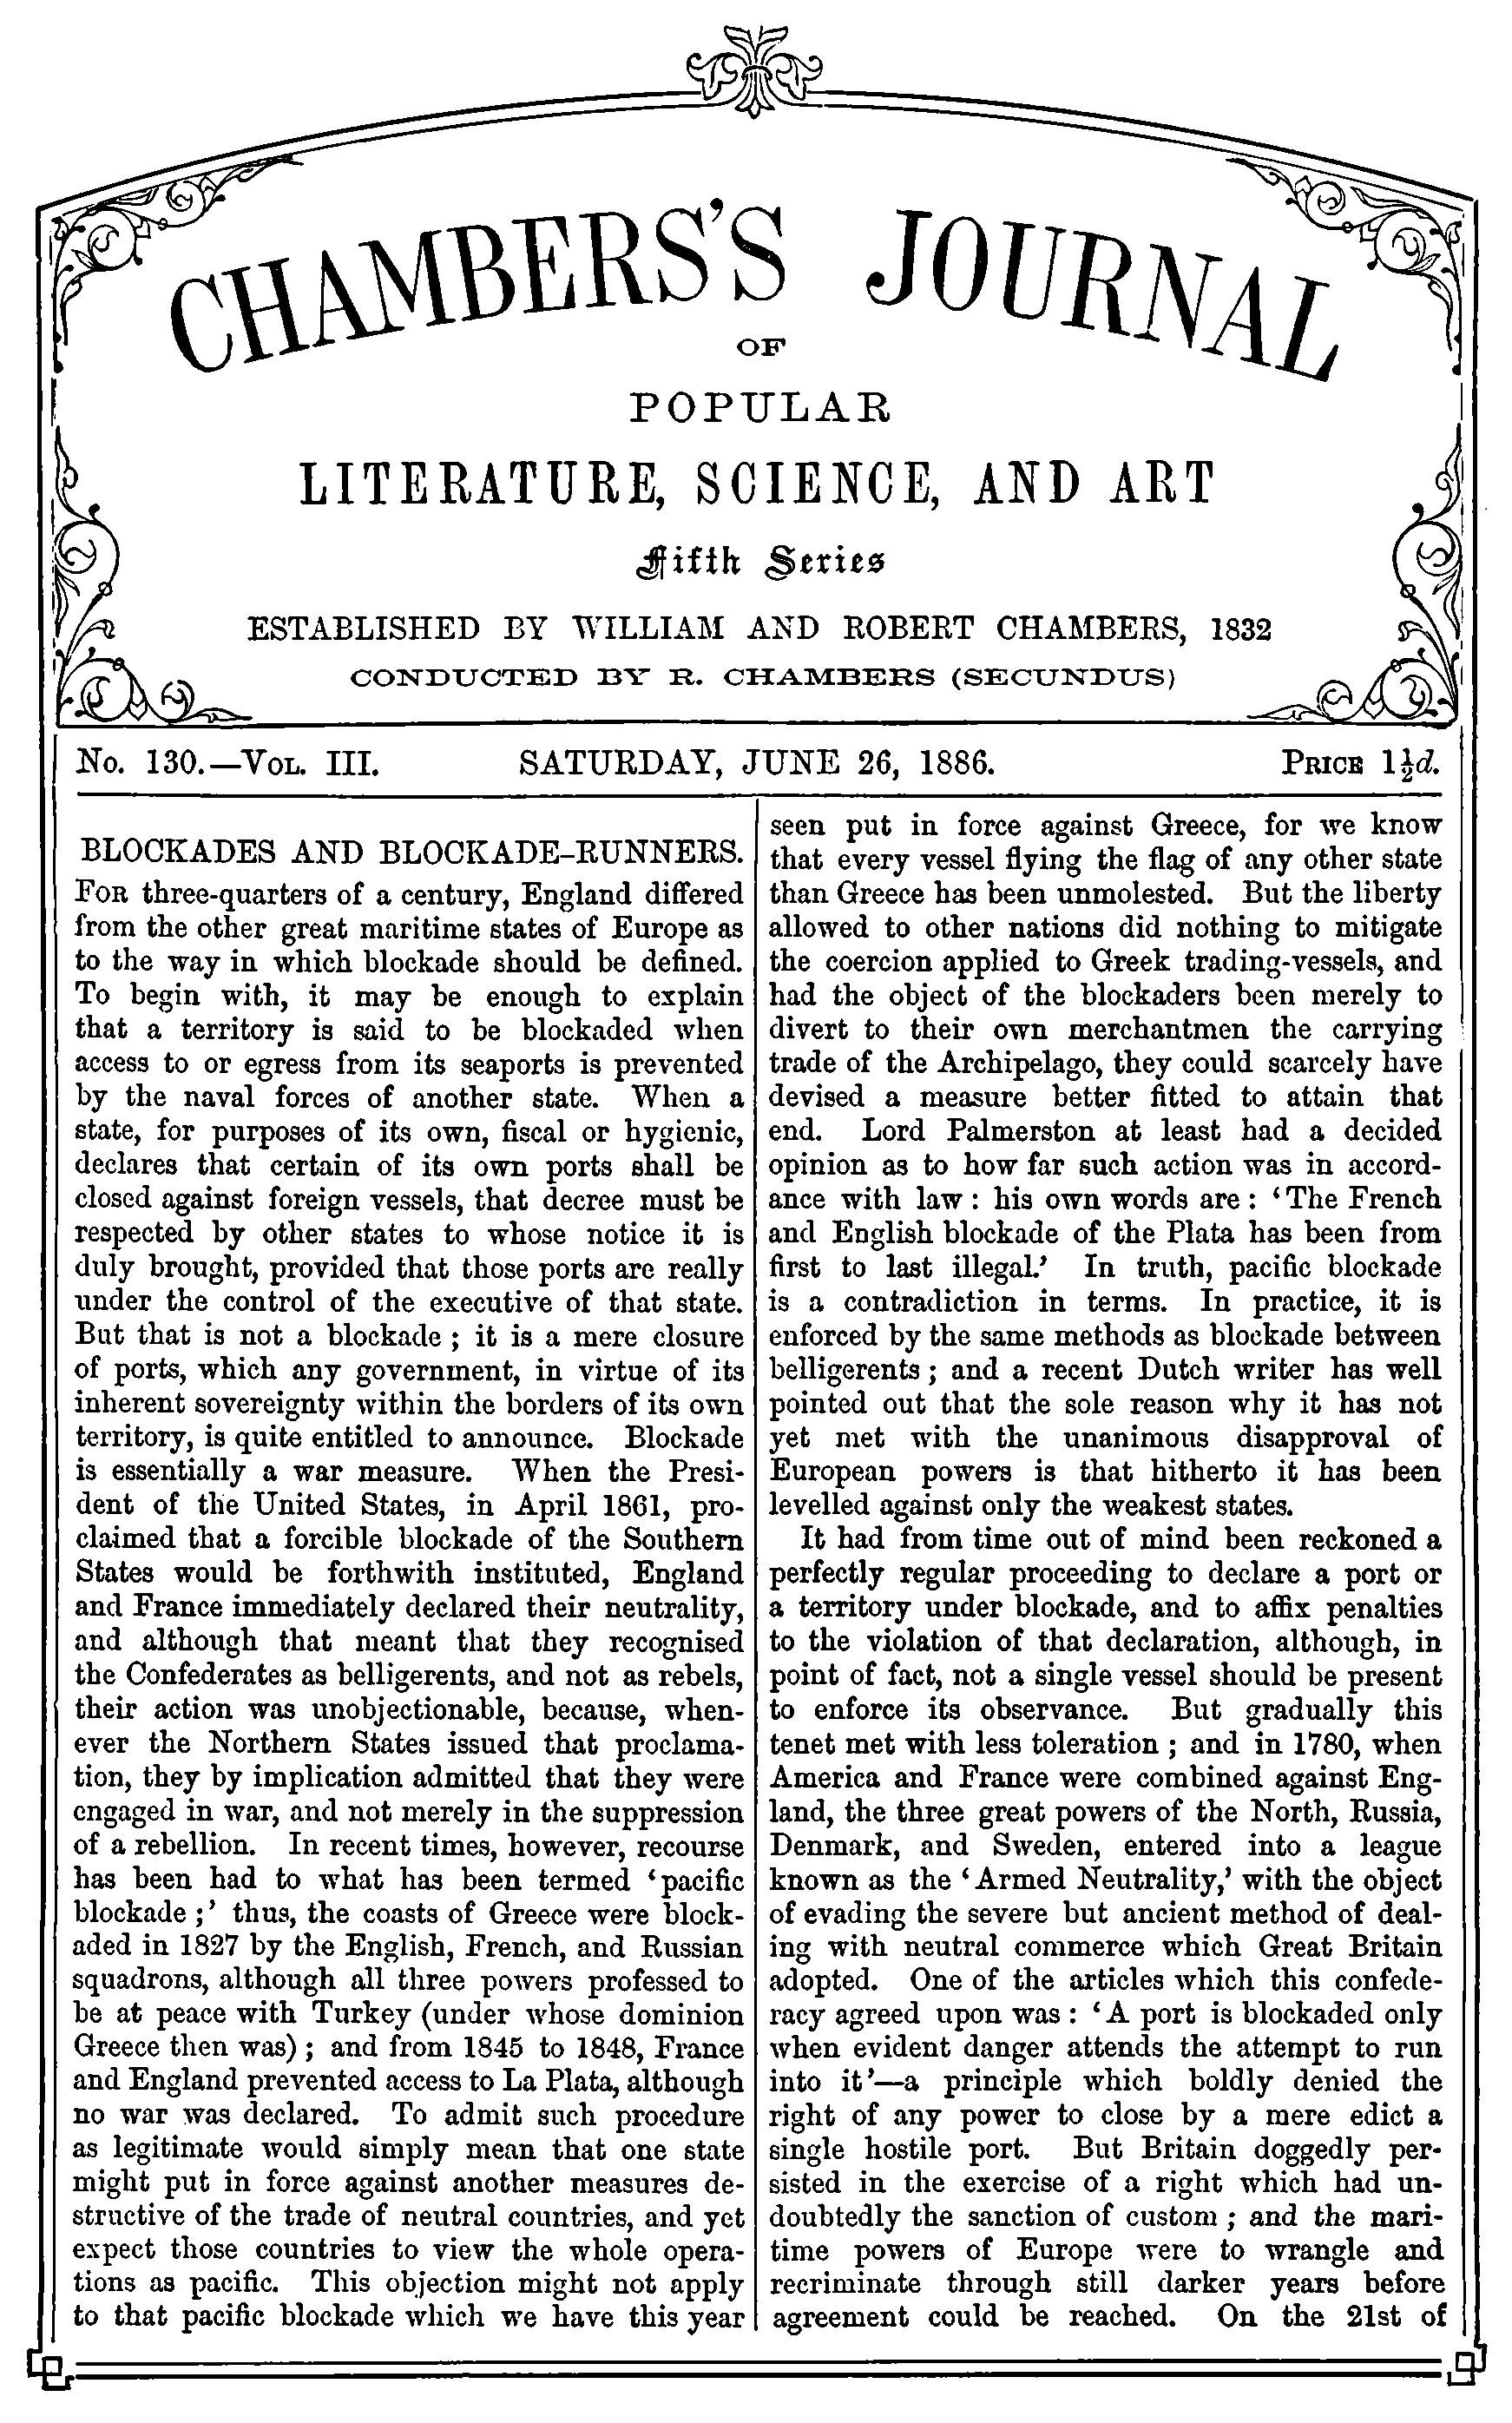 Chambers's Journal of Popular Literature, Science, and Art, fifth series, no. 130, vol. III, June 26, 1886